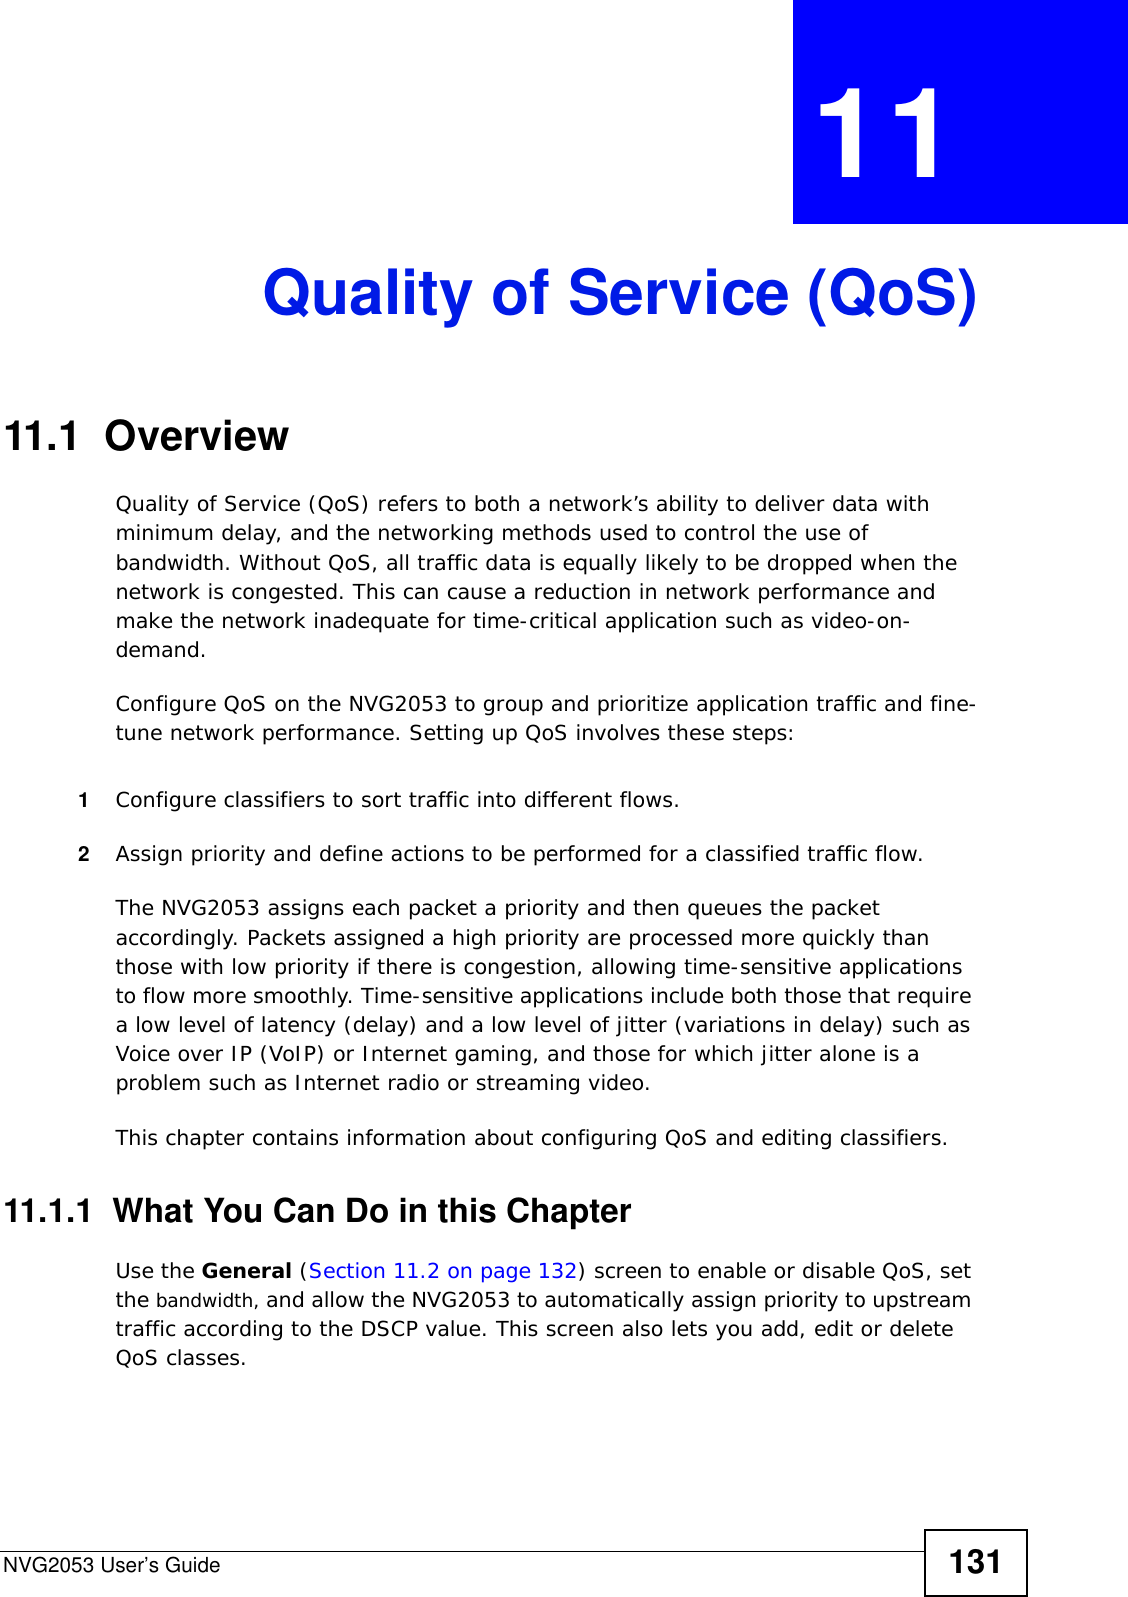 NVG2053 User’s Guide 131CHAPTER  11 Quality of Service (QoS)11.1  Overview Quality of Service (QoS) refers to both a network’s ability to deliver data with minimum delay, and the networking methods used to control the use of bandwidth. Without QoS, all traffic data is equally likely to be dropped when the network is congested. This can cause a reduction in network performance and make the network inadequate for time-critical application such as video-on-demand.Configure QoS on the NVG2053 to group and prioritize application traffic and fine-tune network performance. Setting up QoS involves these steps:1Configure classifiers to sort traffic into different flows. 2Assign priority and define actions to be performed for a classified traffic flow. The NVG2053 assigns each packet a priority and then queues the packet accordingly. Packets assigned a high priority are processed more quickly than those with low priority if there is congestion, allowing time-sensitive applications to flow more smoothly. Time-sensitive applications include both those that require a low level of latency (delay) and a low level of jitter (variations in delay) such as Voice over IP (VoIP) or Internet gaming, and those for which jitter alone is a problem such as Internet radio or streaming video.This chapter contains information about configuring QoS and editing classifiers.11.1.1  What You Can Do in this ChapterUse the General (Section 11.2 on page 132) screen to enable or disable QoS, set the bandwidth, and allow the NVG2053 to automatically assign priority to upstream traffic according to the DSCP value. This screen also lets you add, edit or delete QoS classes.